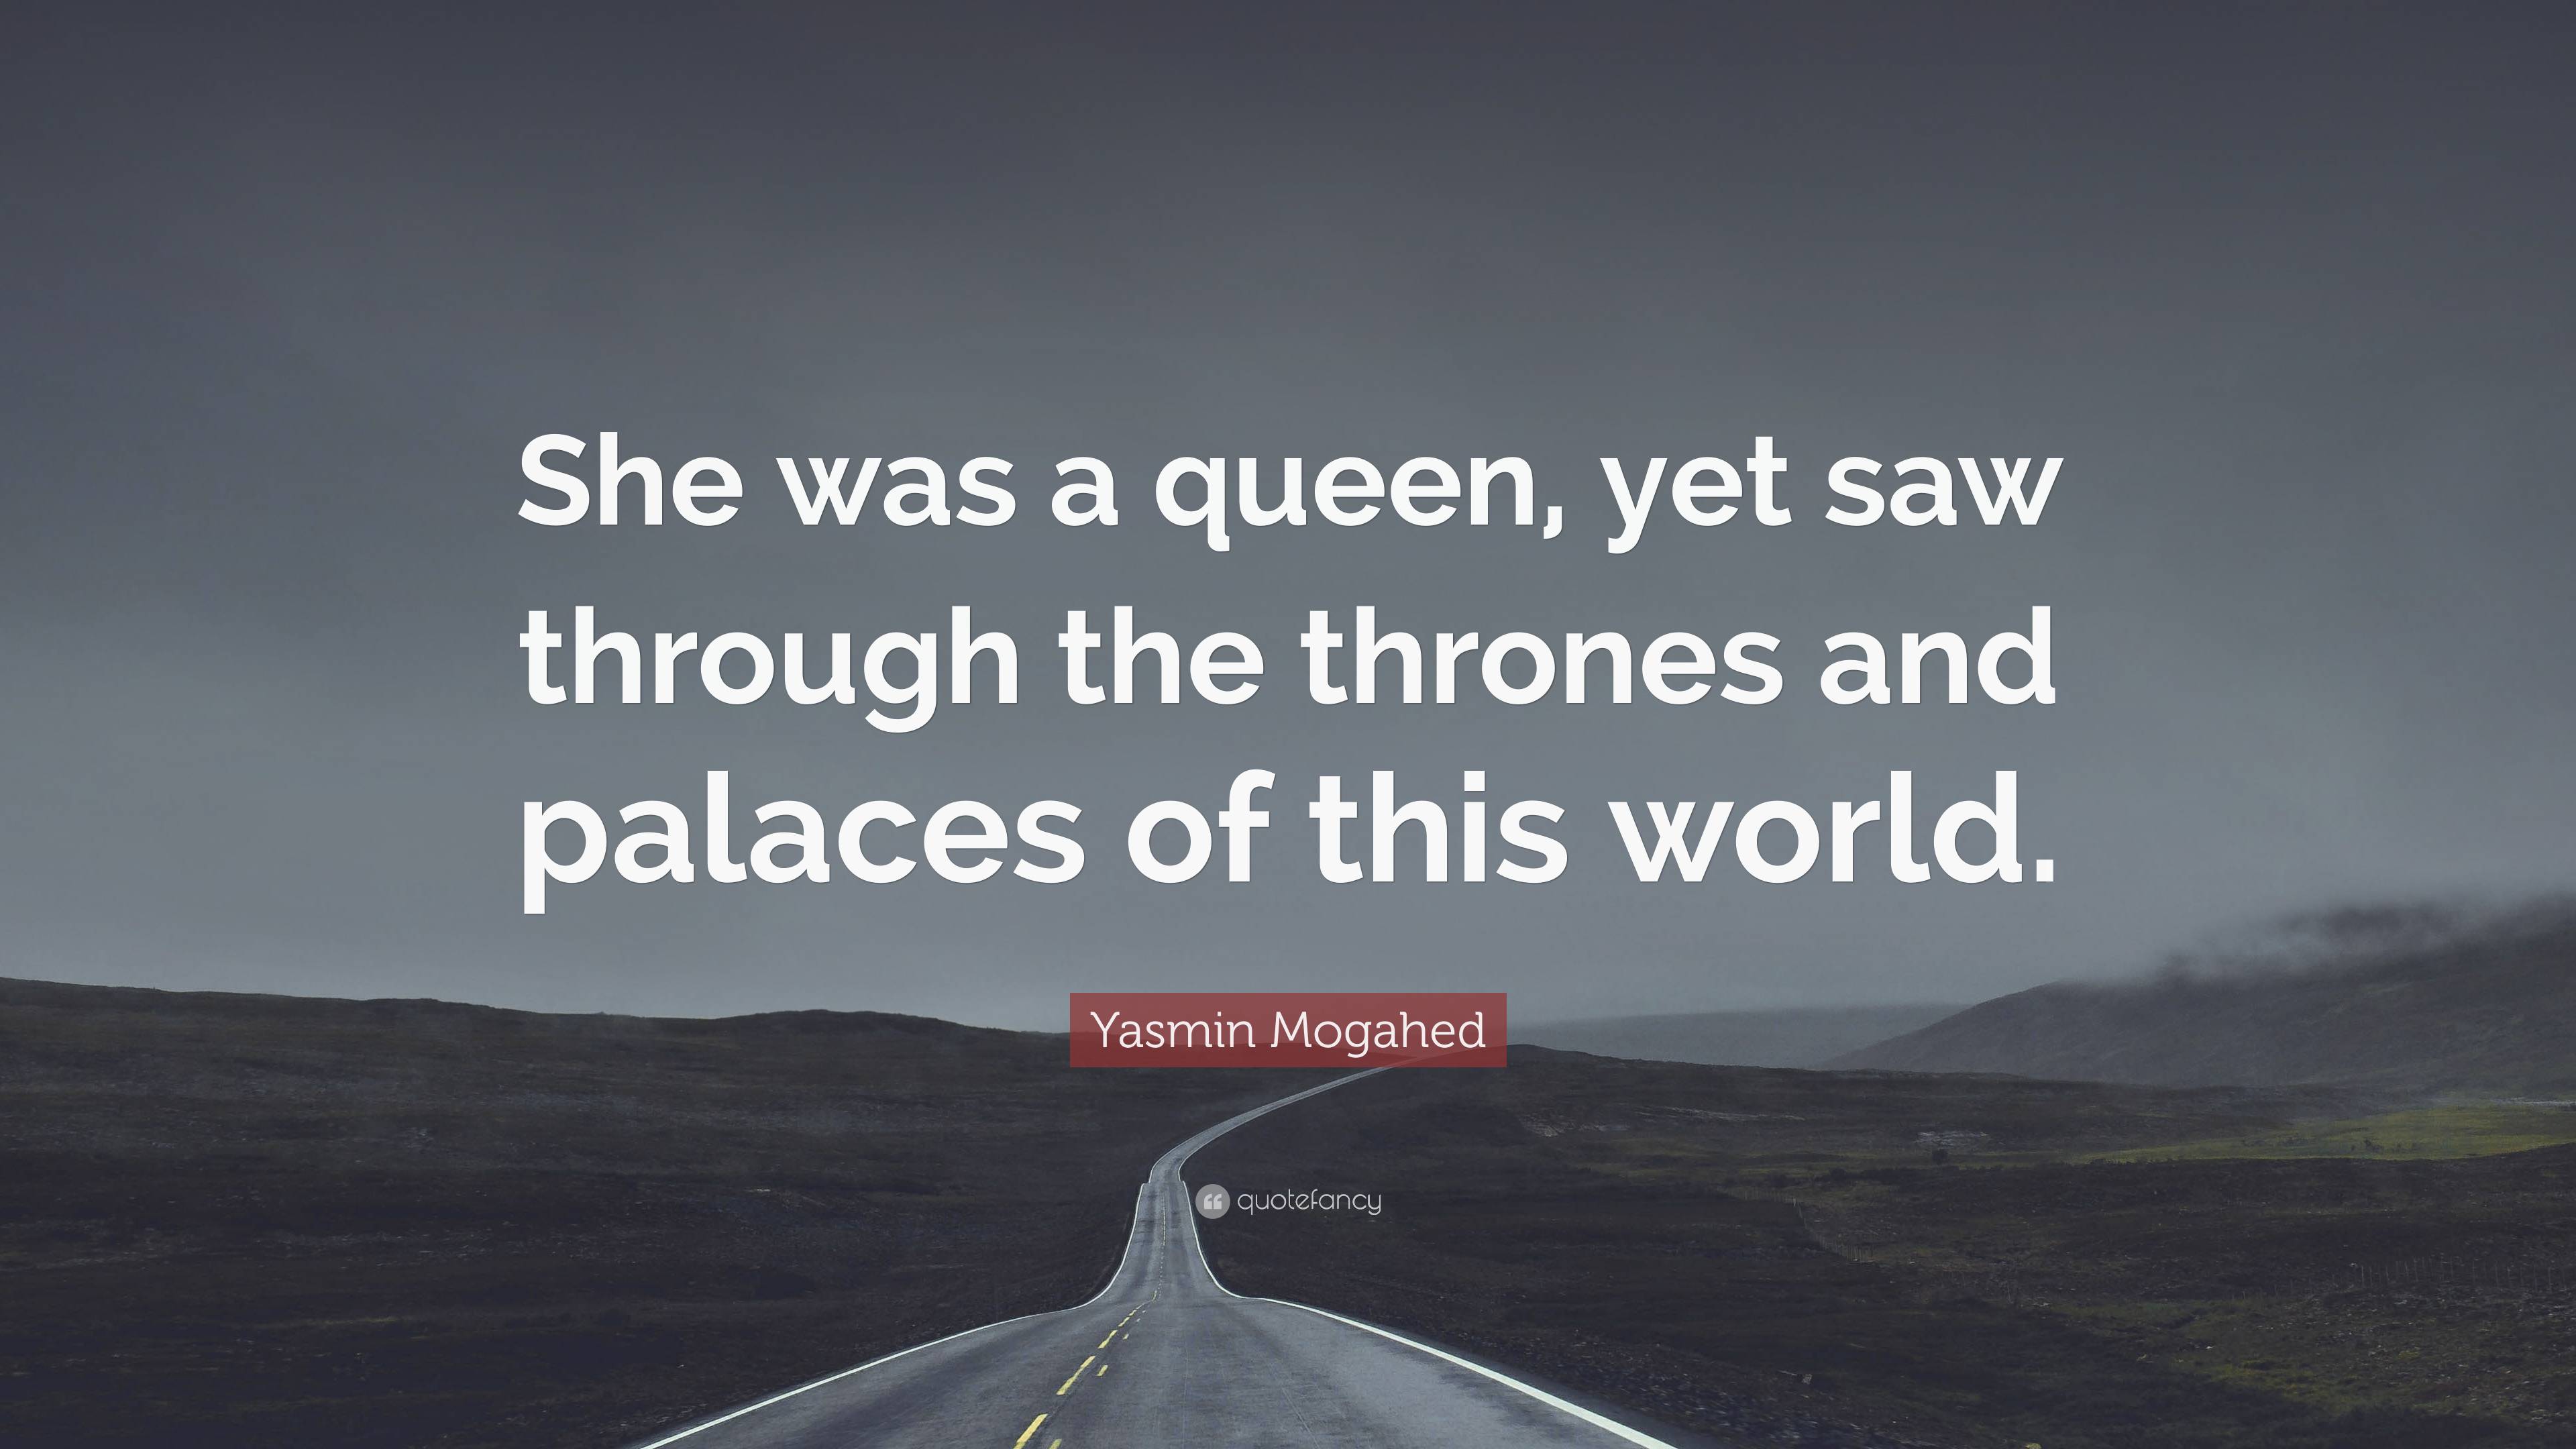 Yasmin Mogahed Quote: “She was a queen, yet saw through the thrones and ...